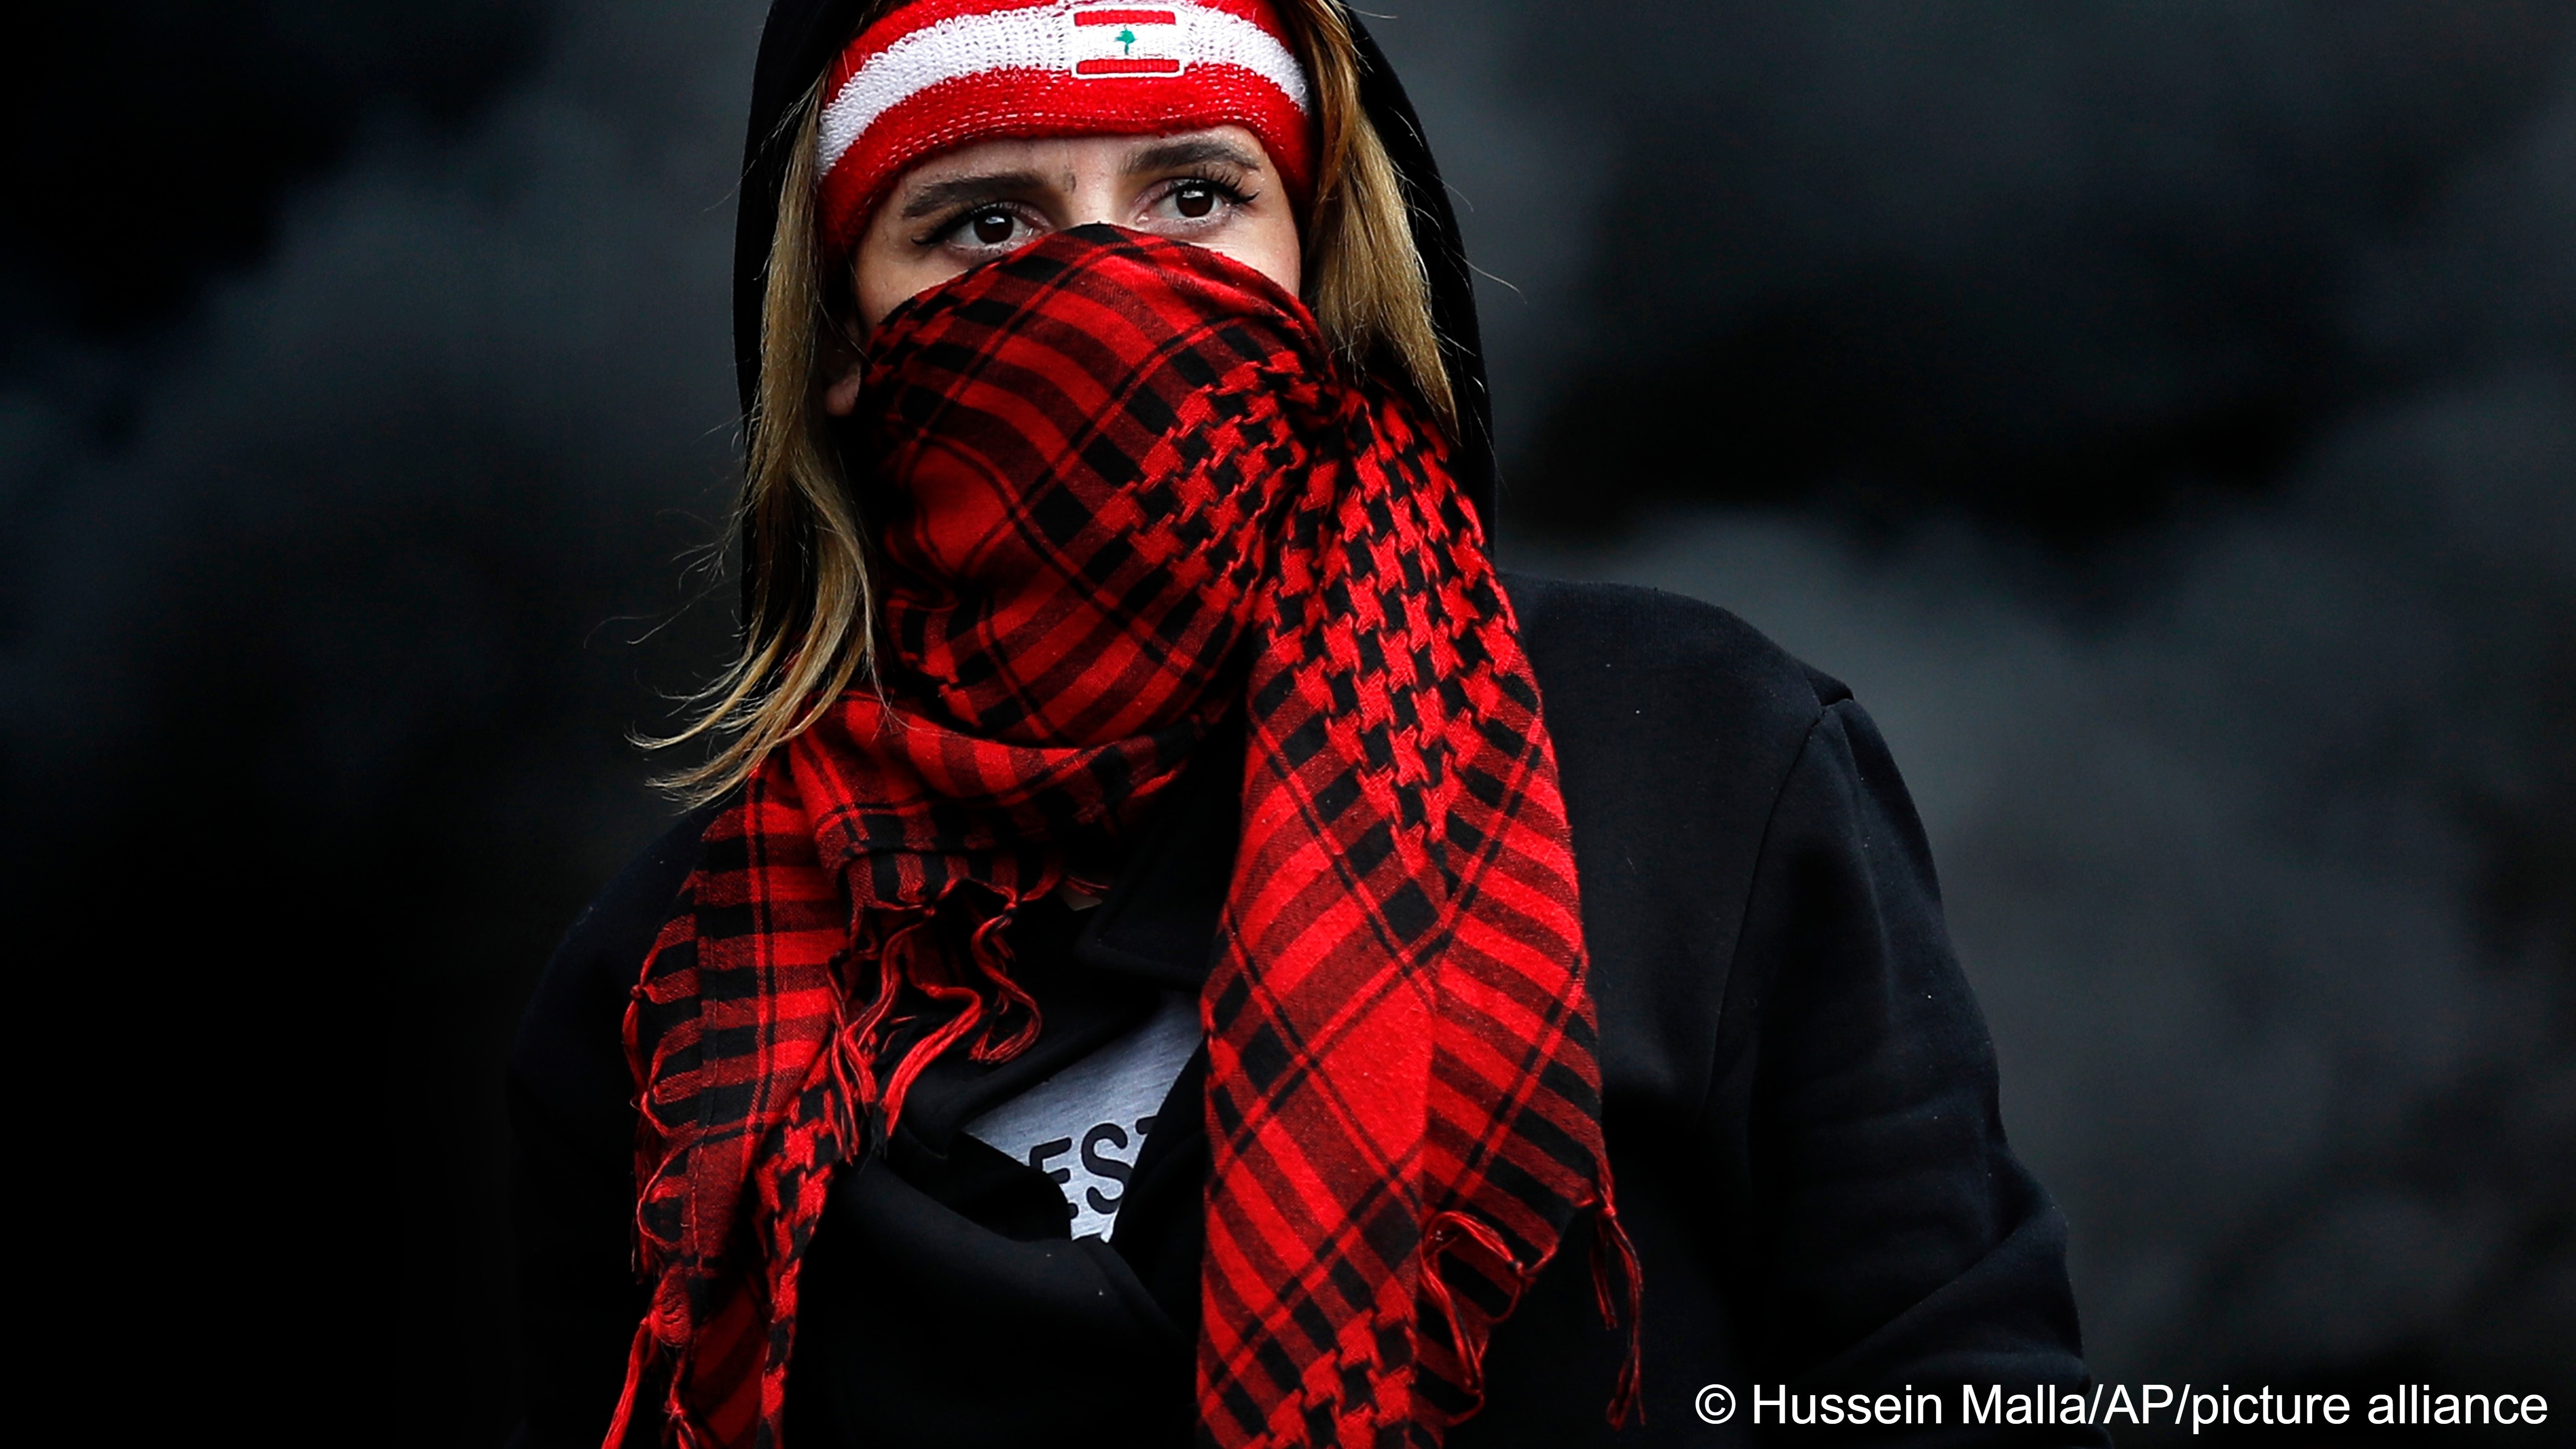 A protester covers her face with a scarf as she blocks a main highway during a protest against the increase in prices of consumer goods and the crash of the local currency, in the town of Zouk Mosbeh, north of Beirut, Lebanon, 8 March 2021 (photo: AP Photo/Hussein Malla)